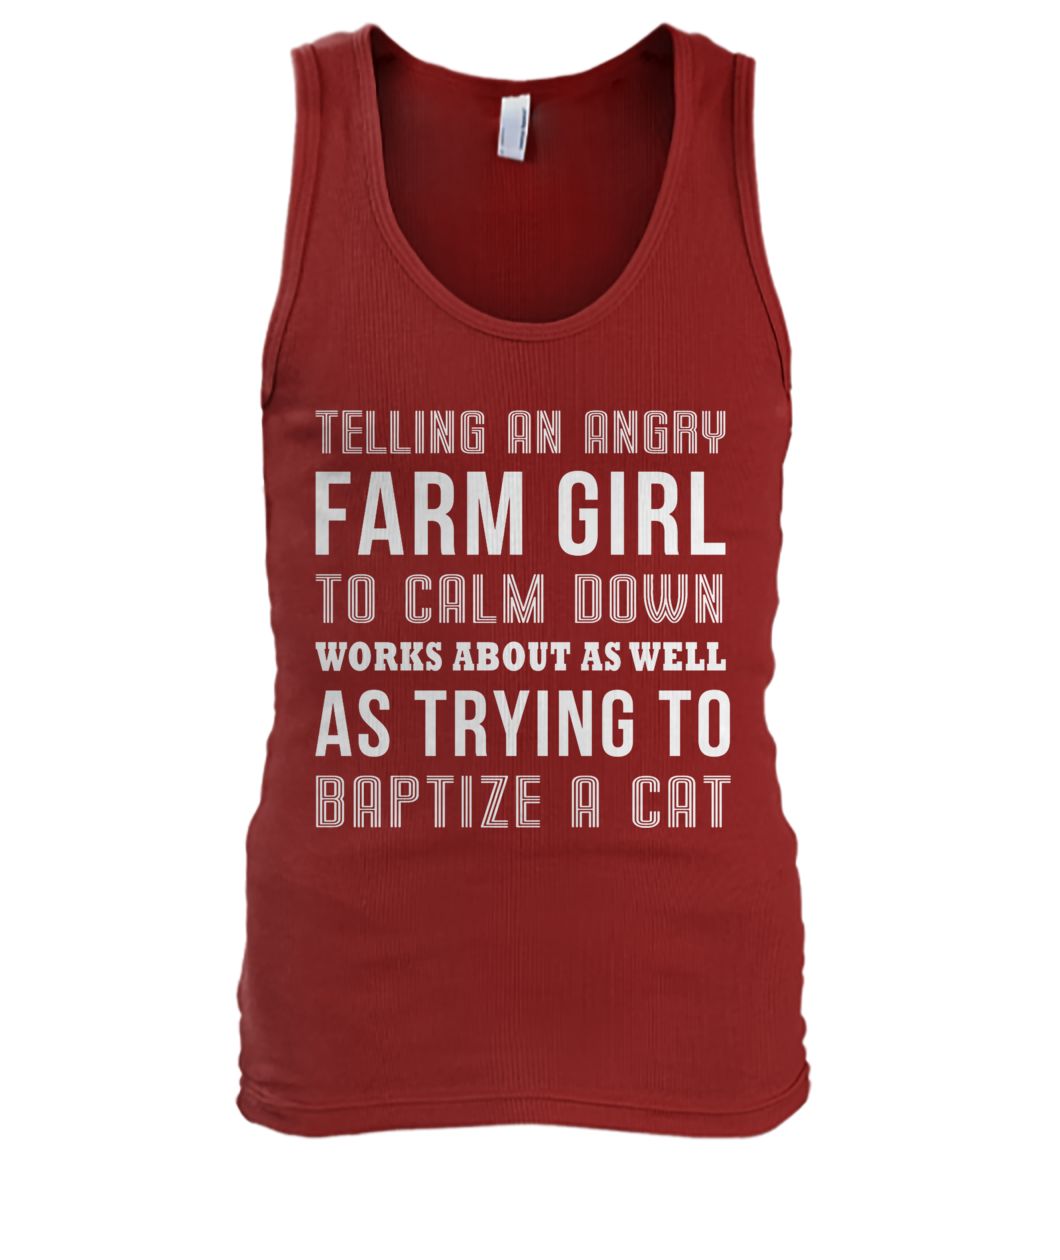 Telling an angry farm girl to calm down works about as well as trying to baptize a cat men's tank top